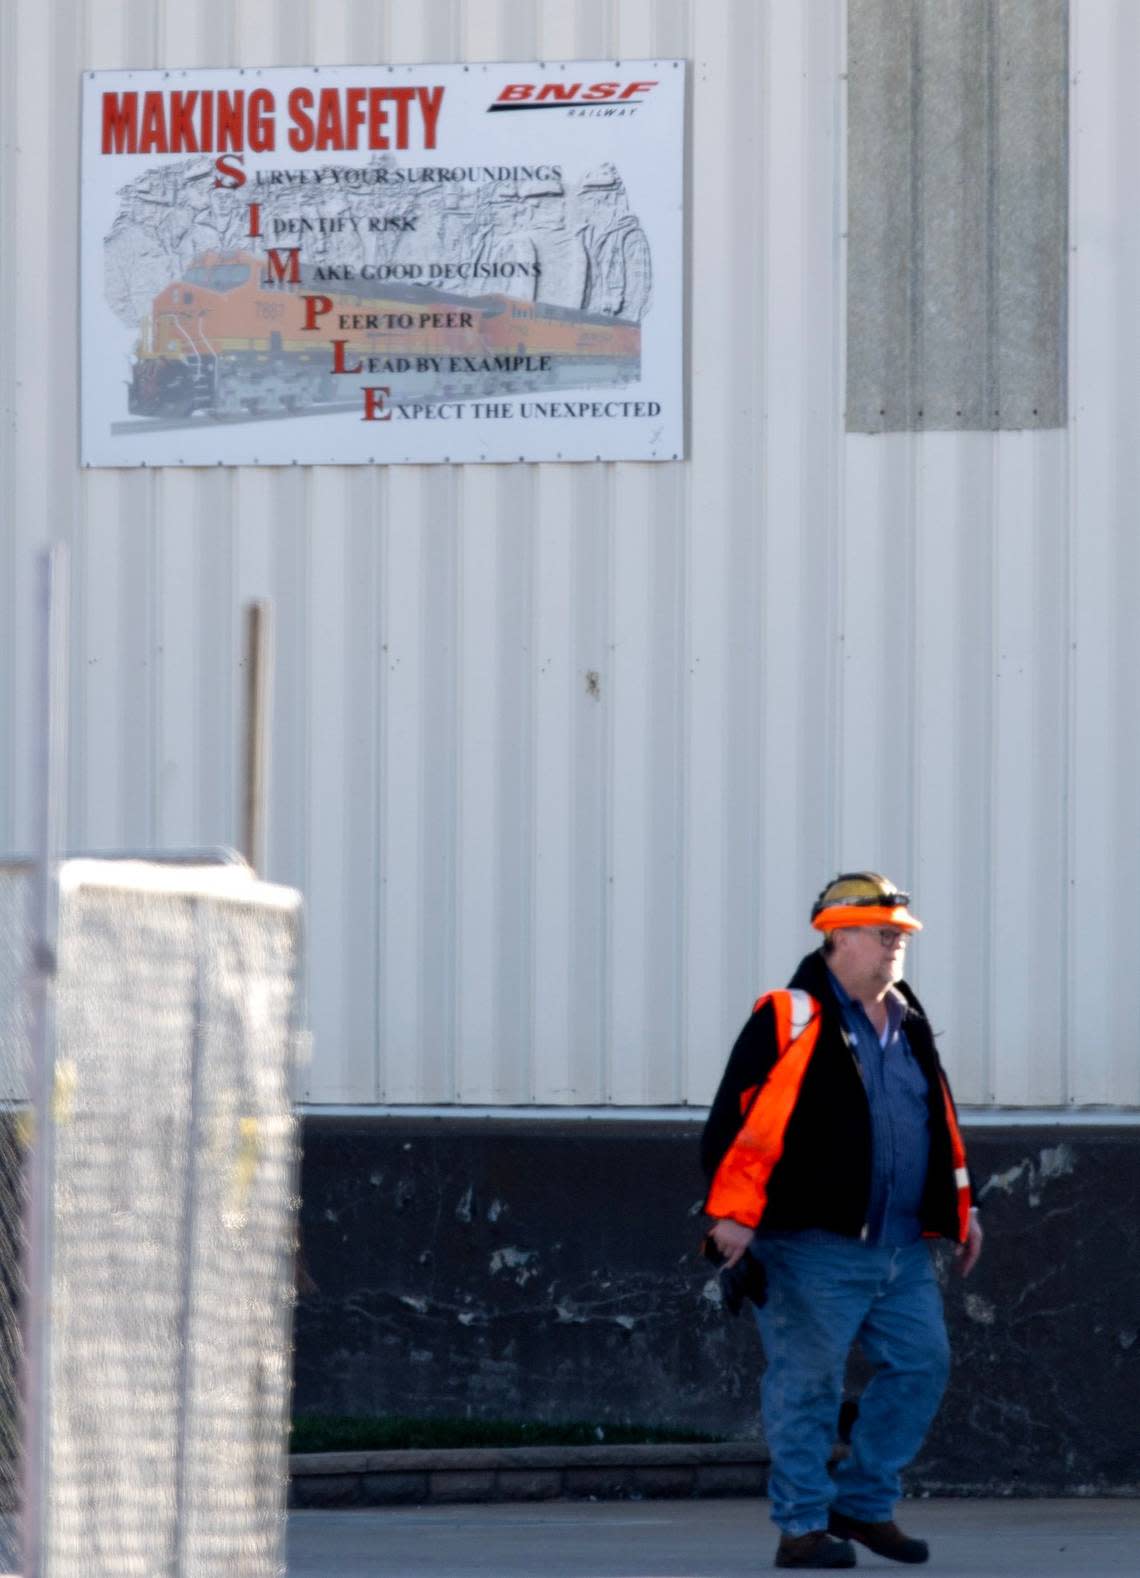 A railroad worker walked past a sign promoting safe working practices at the BNSF Railway Argentine Yard in Kansas City, Kansas.